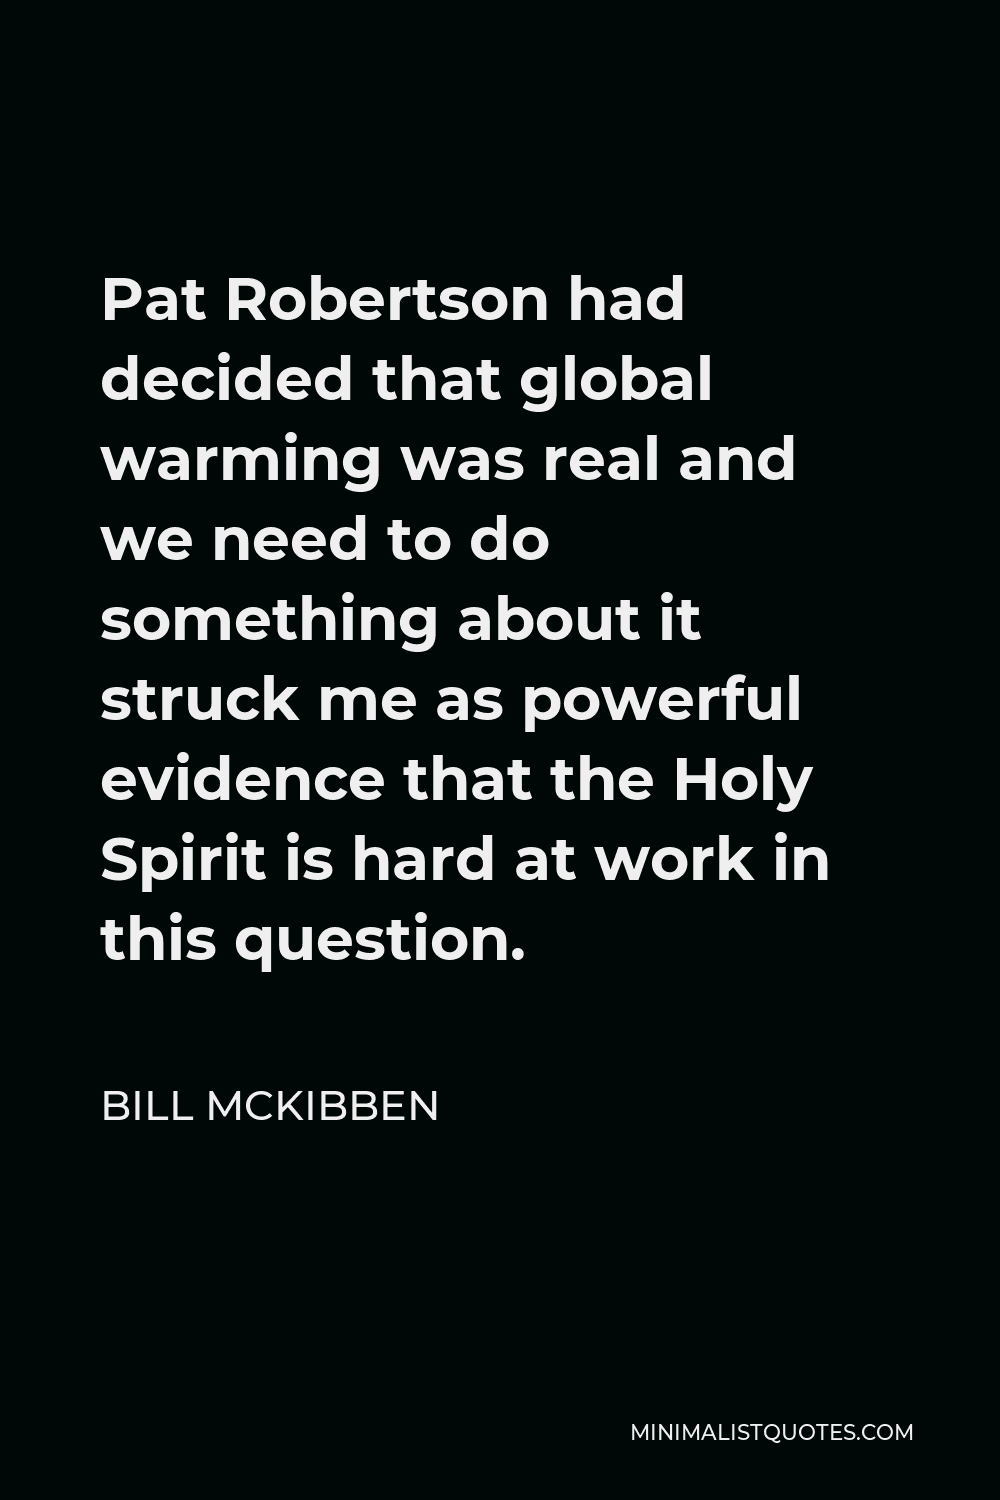 Bill McKibben Quote - Pat Robertson had decided that global warming was real and we need to do something about it struck me as powerful evidence that the Holy Spirit is hard at work in this question.